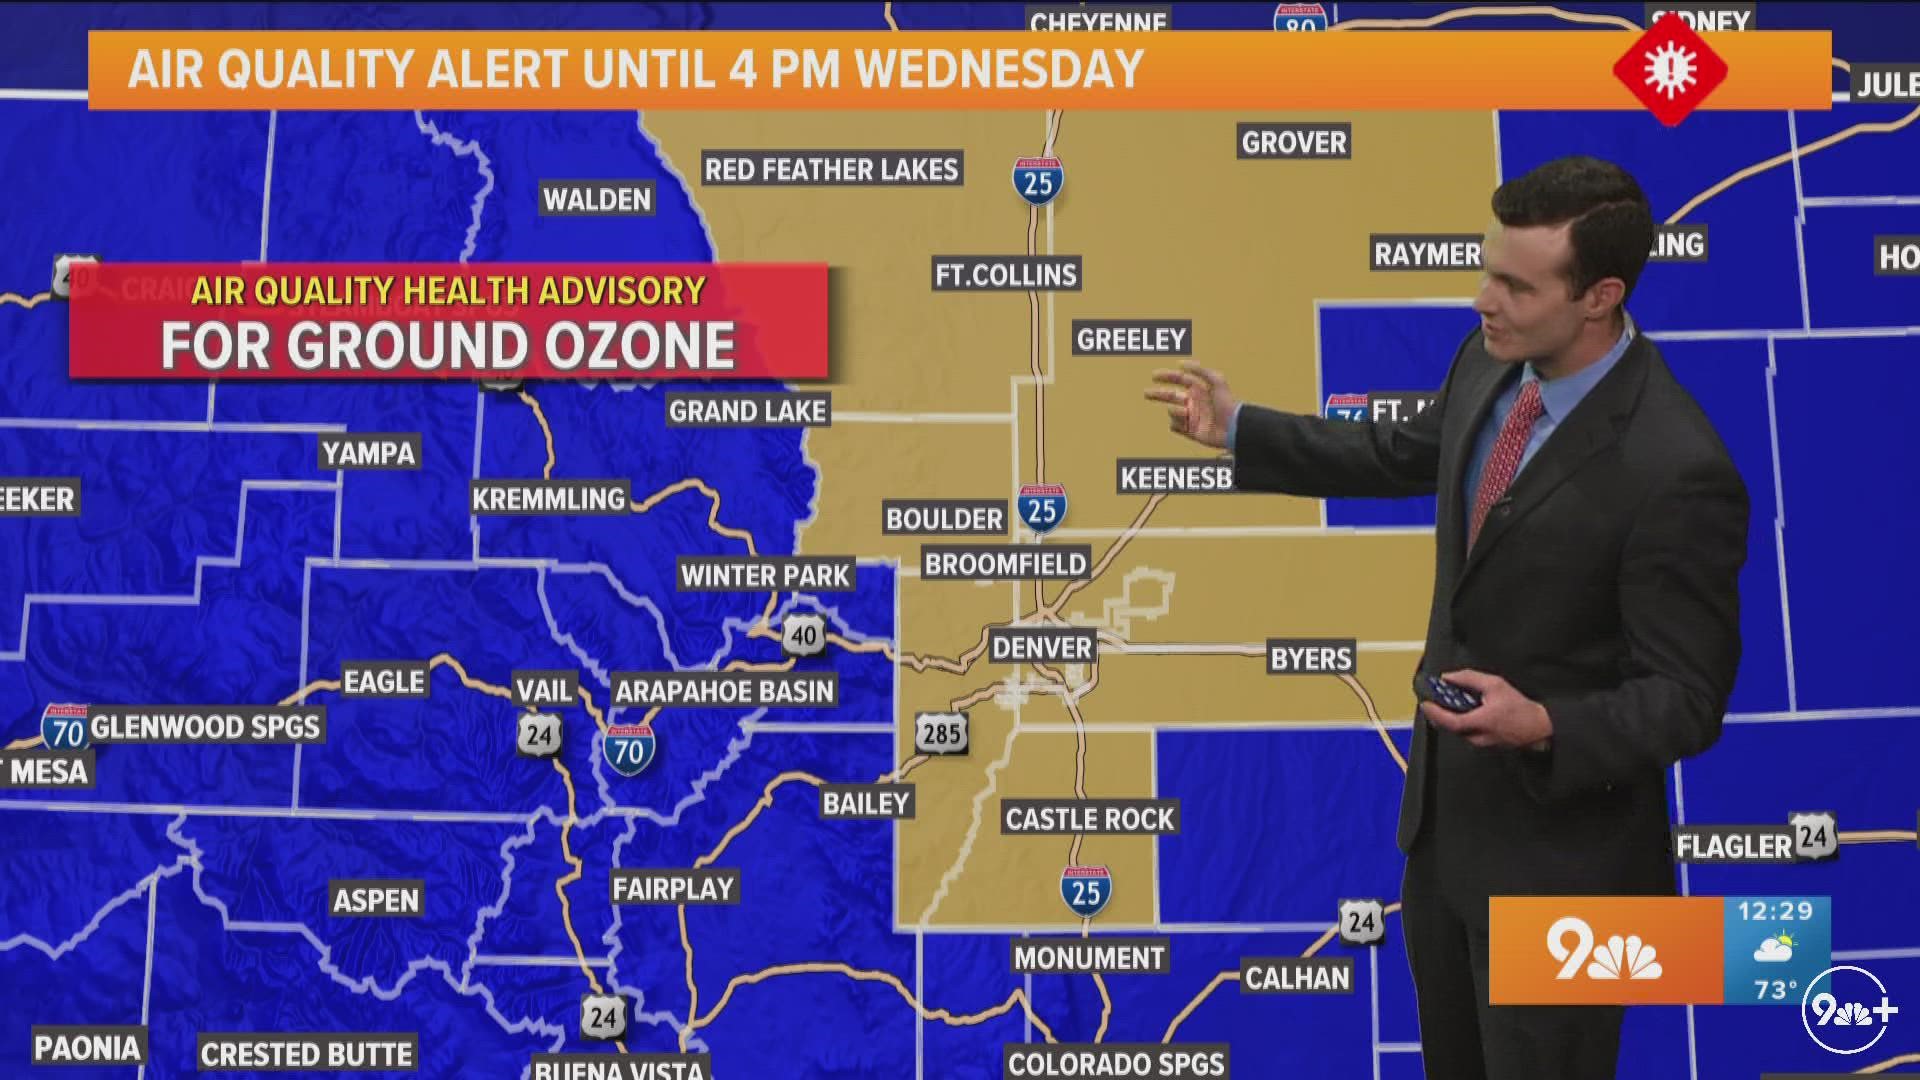 Wednesday afternoon will be cloudy with a few scattered storms and not as cool. Meteorologist Greg Perez has the latest look at your Colorado forecast.